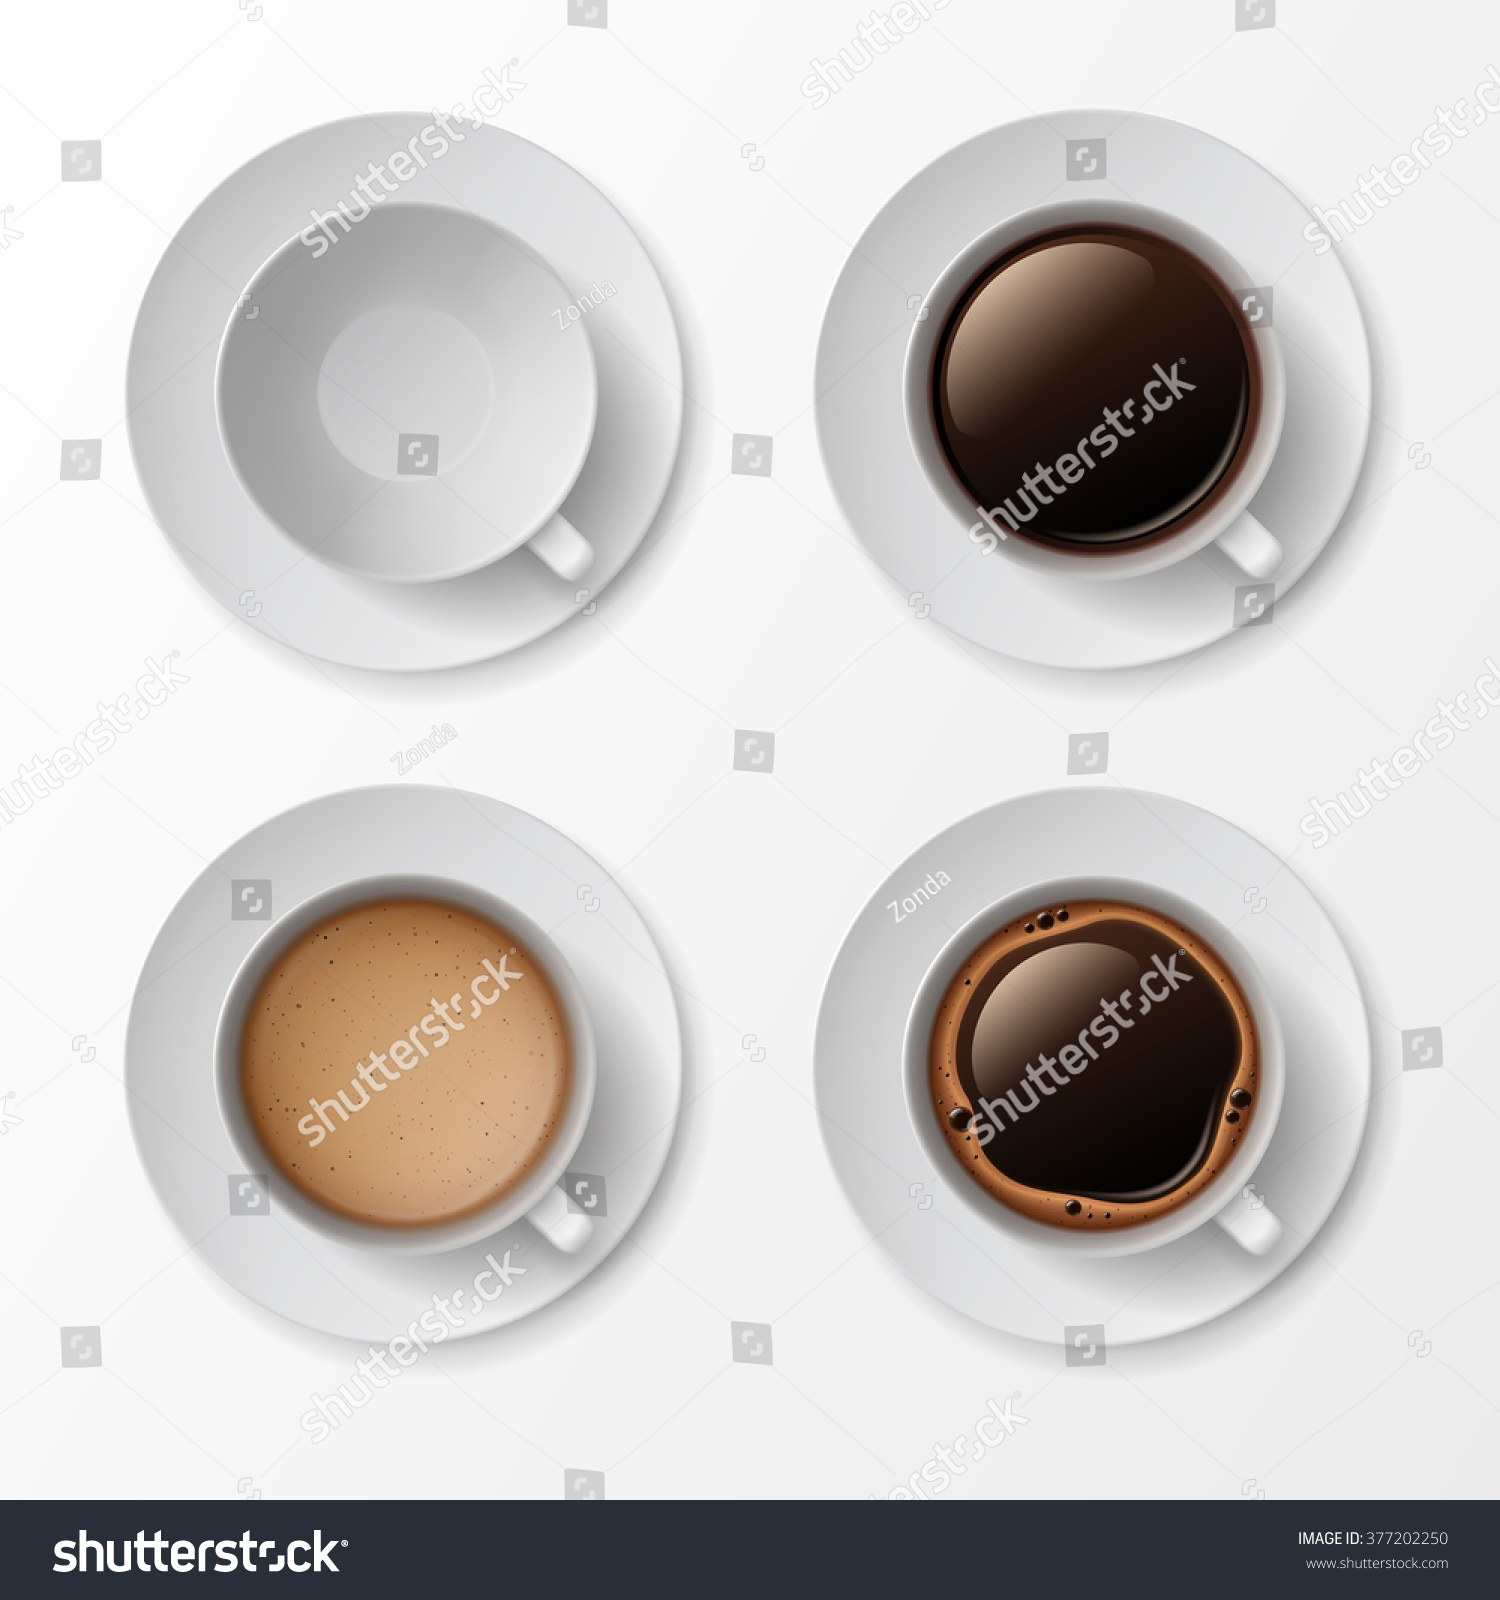 Vector Set of Coffee Cup Mug with Crema Foam Bubbles Top View Isolated On White Background #377202250